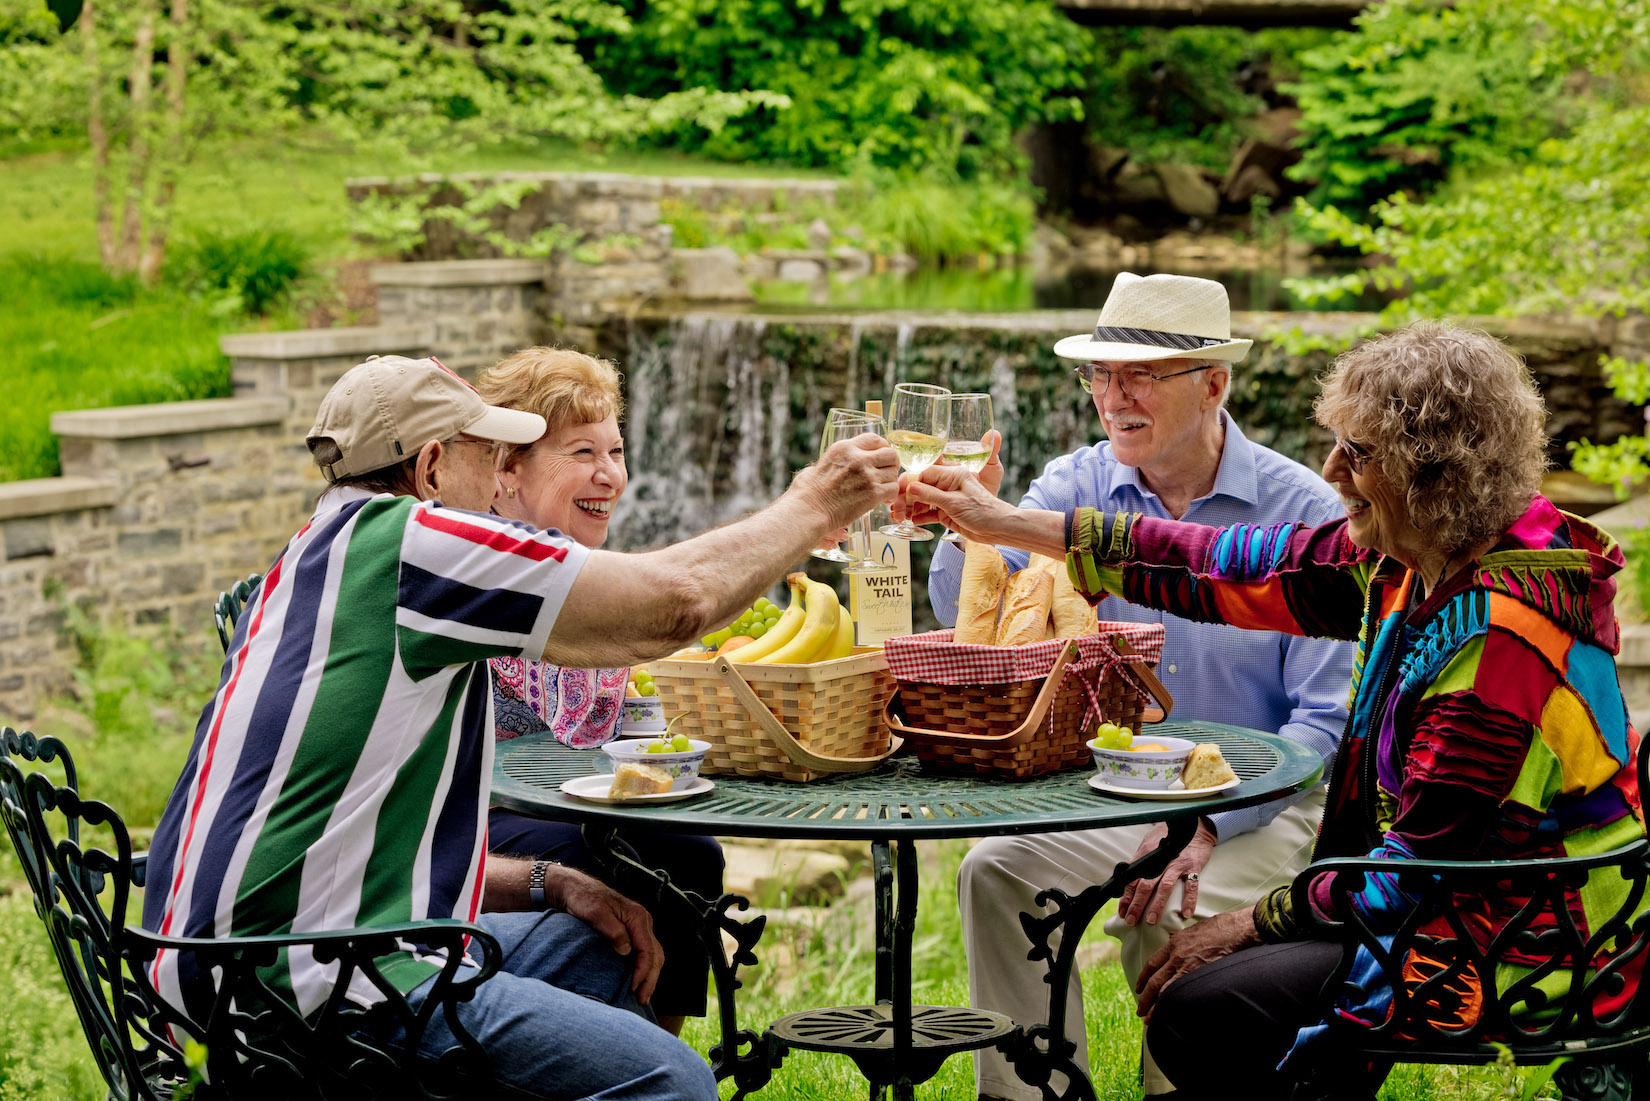 Seniors toasting with wine glasses at an outdoor table with picnic baskets